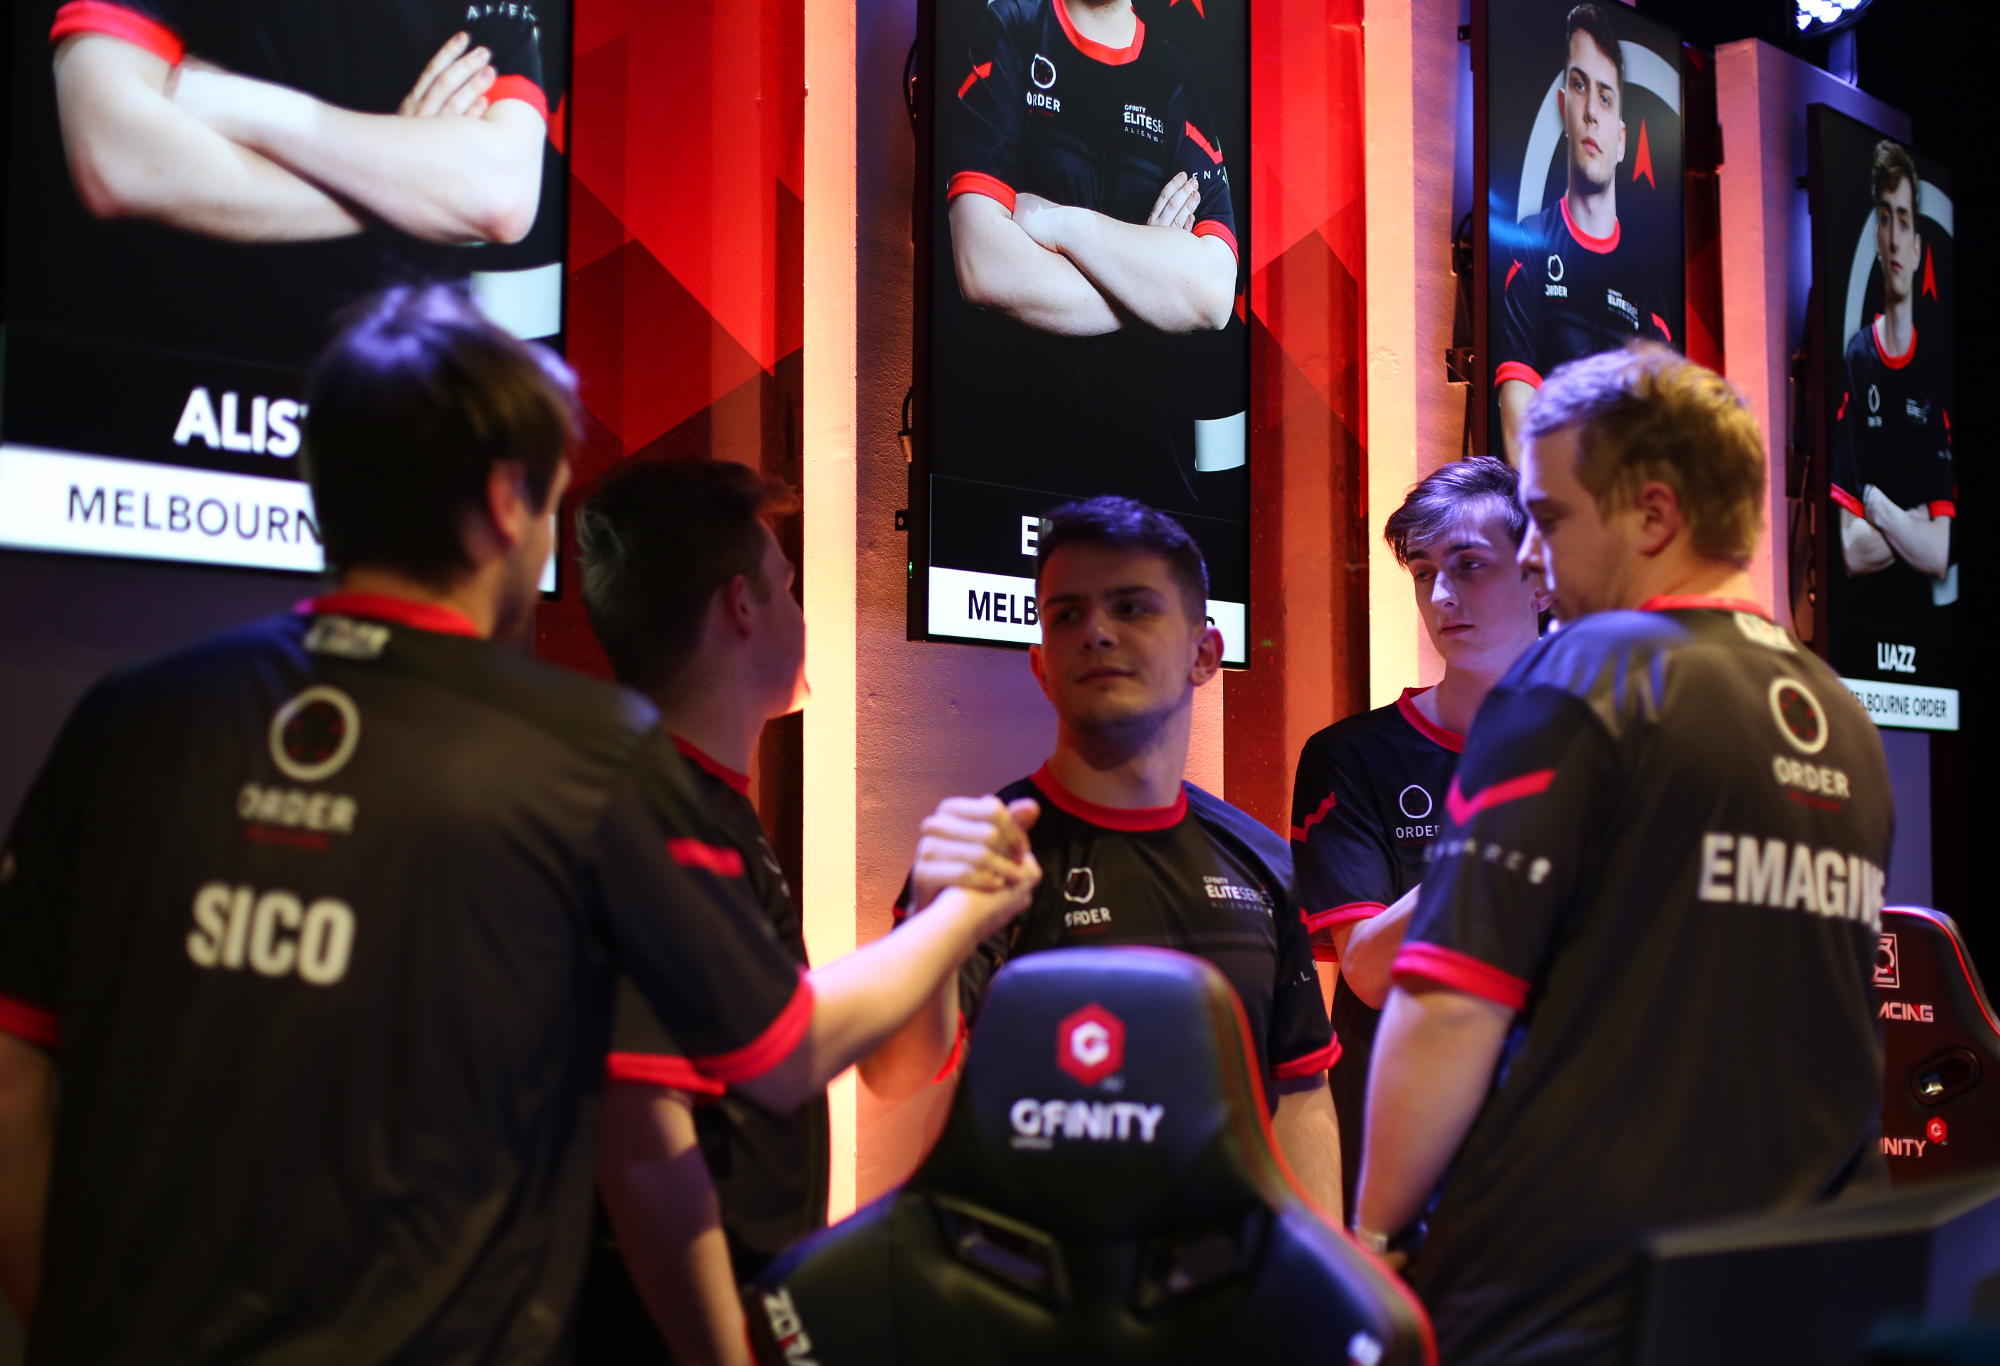 Members of the Melbourne Order CS:GO team celebrate their grand final victory at the Gfinity Elite Series.